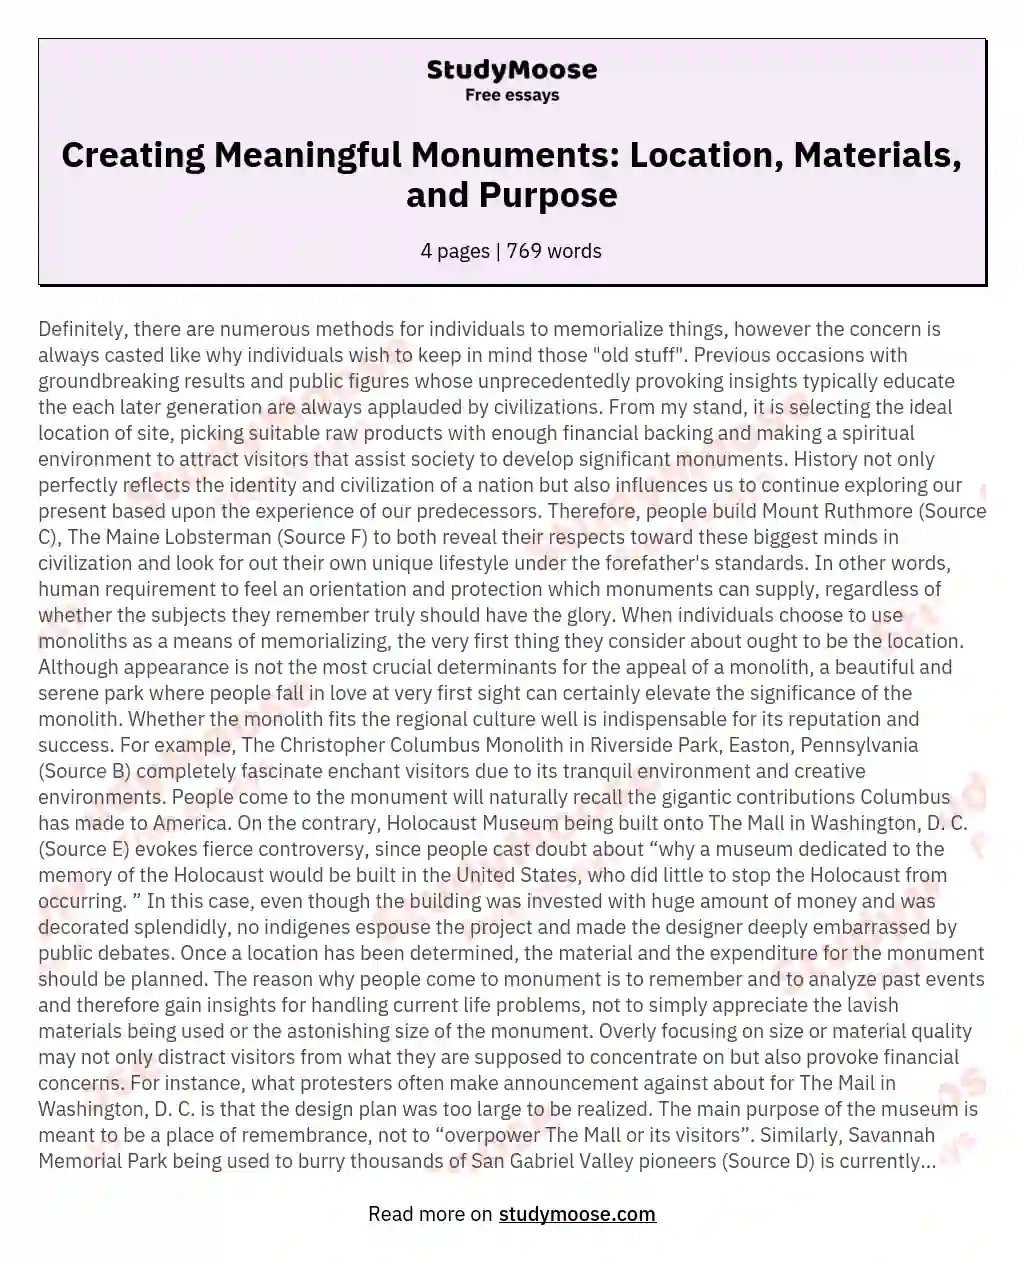 Creating Meaningful Monuments: Location, Materials, and Purpose essay